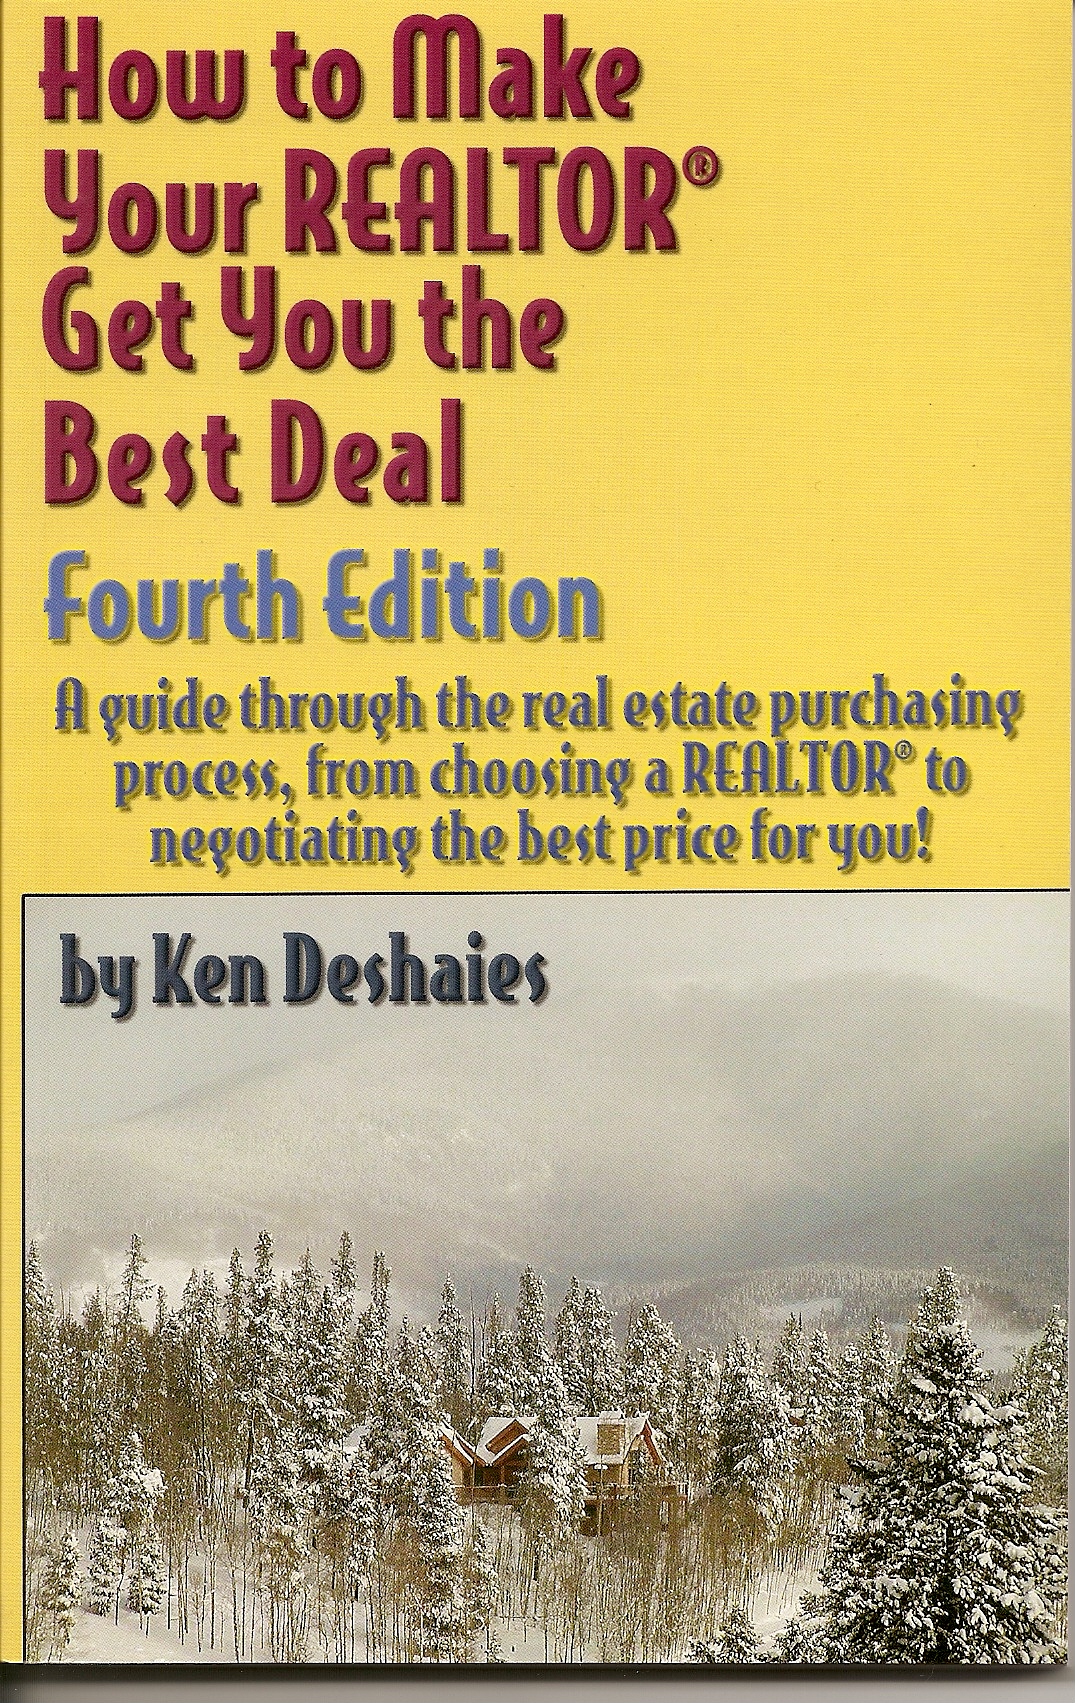 How to Make Your REALTOR Get You the Best Deal